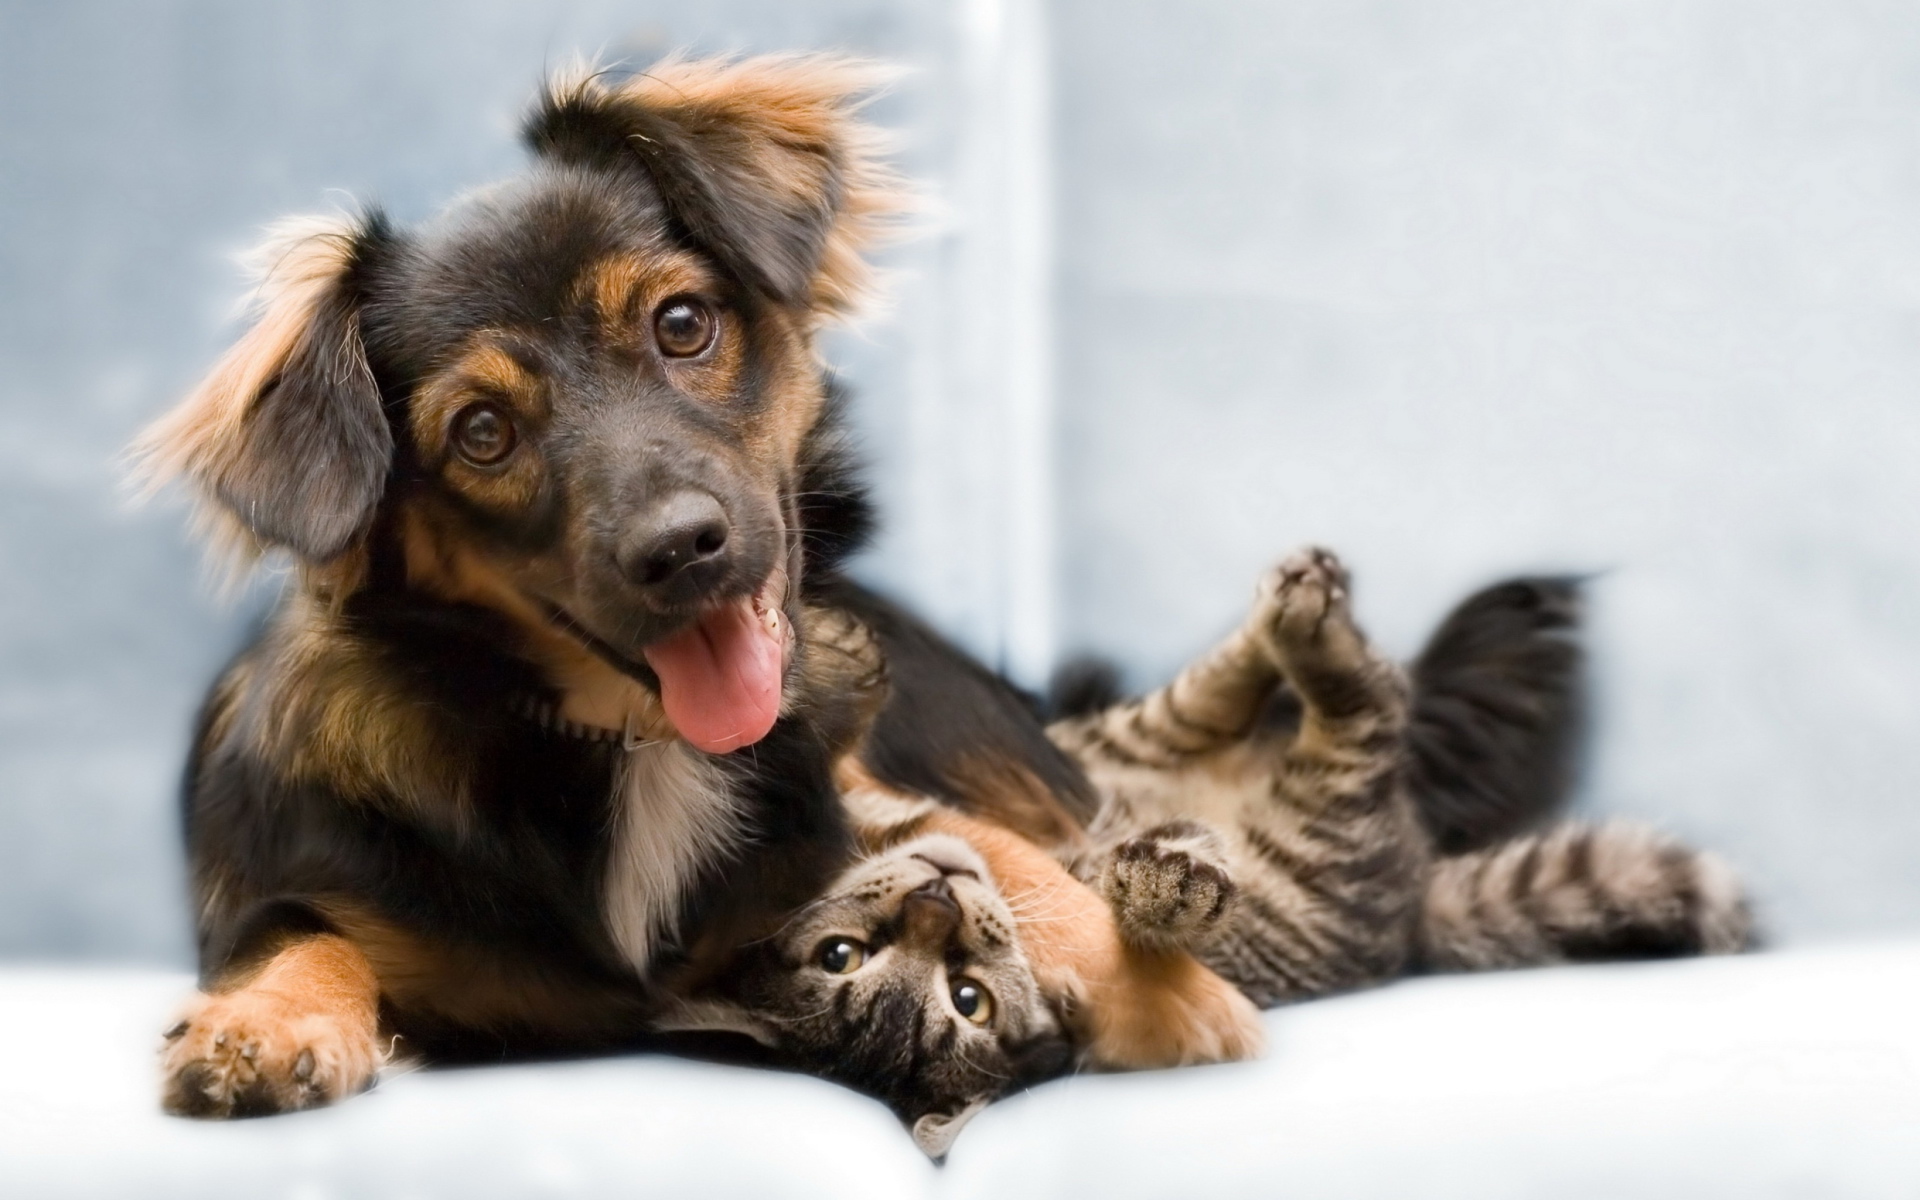 Dog and Cat wallpaper 1920x1200